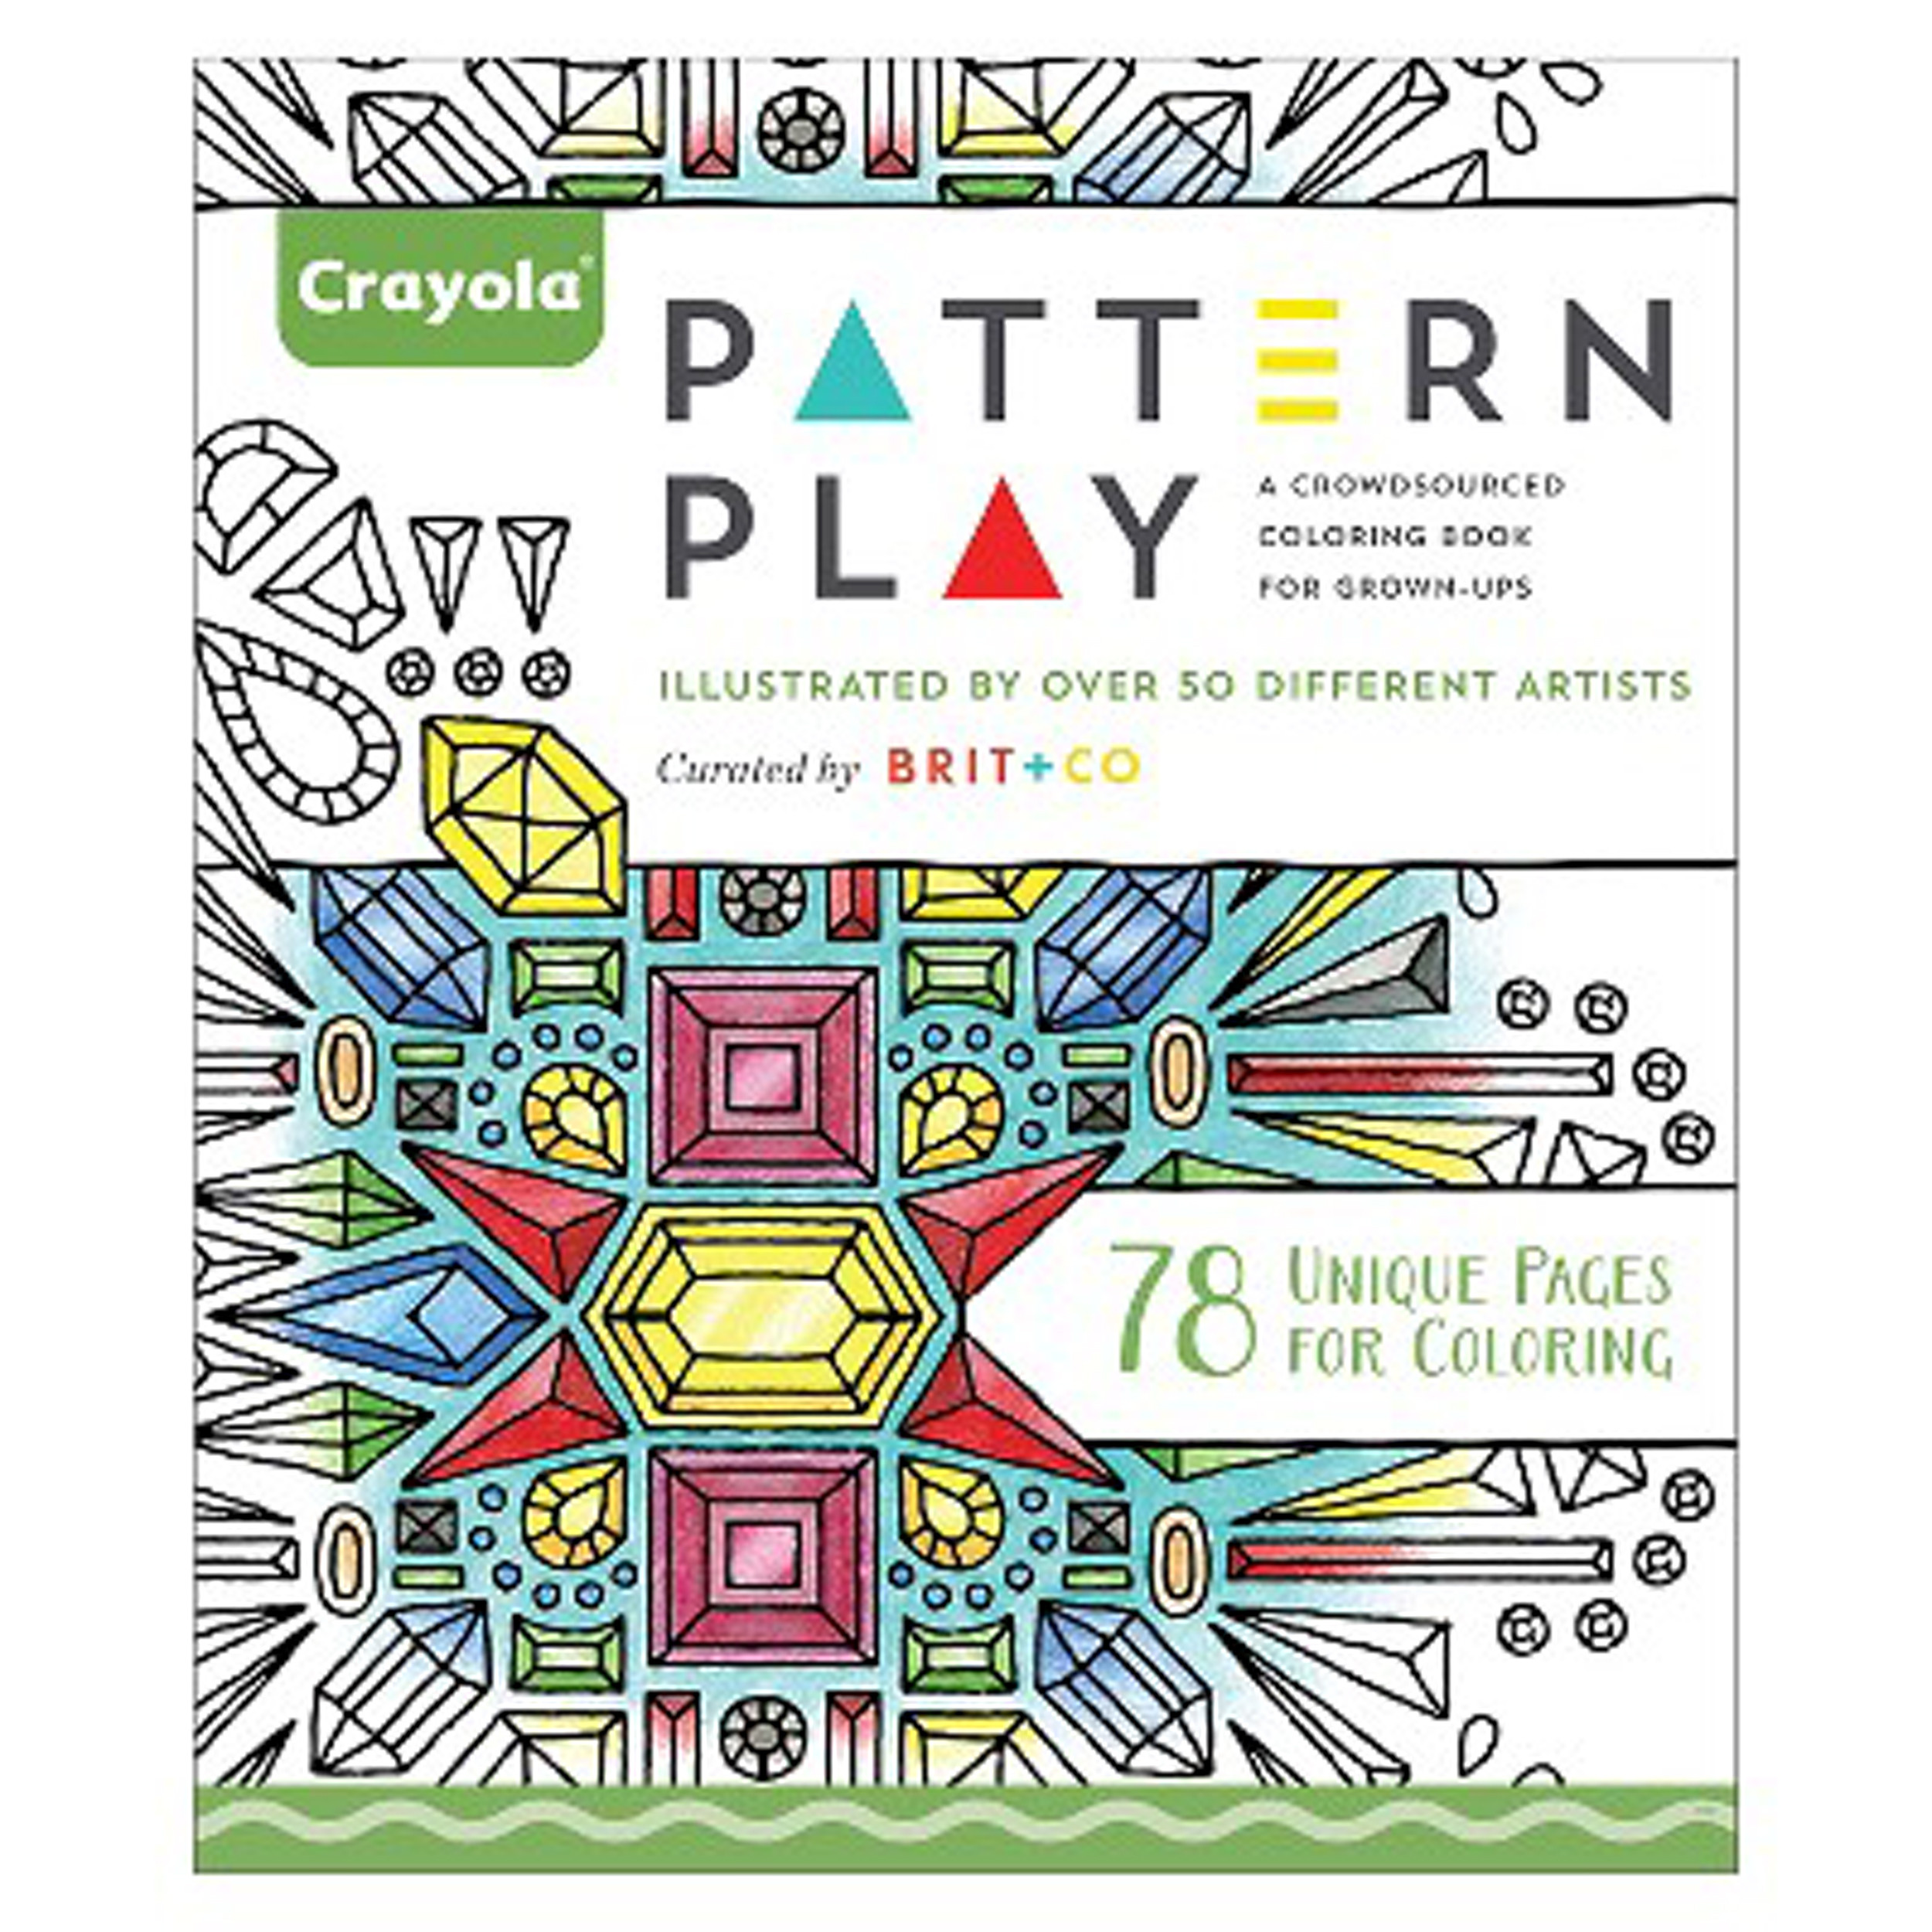 Top 23 Target Coloring Books for Adults - Home, Family, Style and Art Ideas